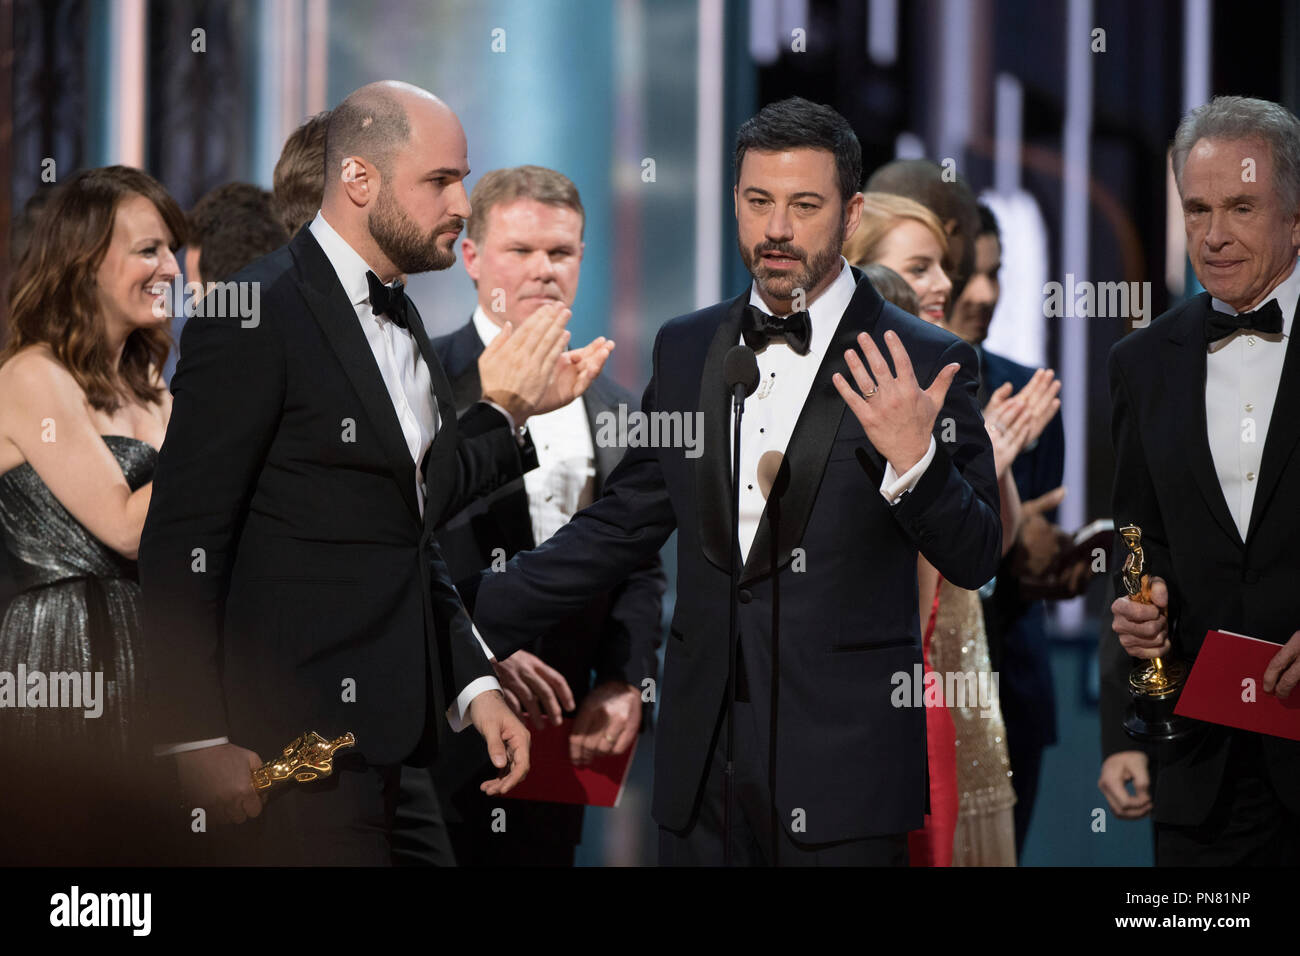 Host Jimmy Kimmel onstage explaining the mix-up after the cast of La La Land was awarded the Oscar® for Best Picture by presenter Warren Beatty during The 89th Oscars® at the Dolby® Theatre in Hollywood, CA on Sunday, February 26, 2017.  File Reference # 33242 489THA  For Editorial Use Only -  All Rights Reserved Stock Photo